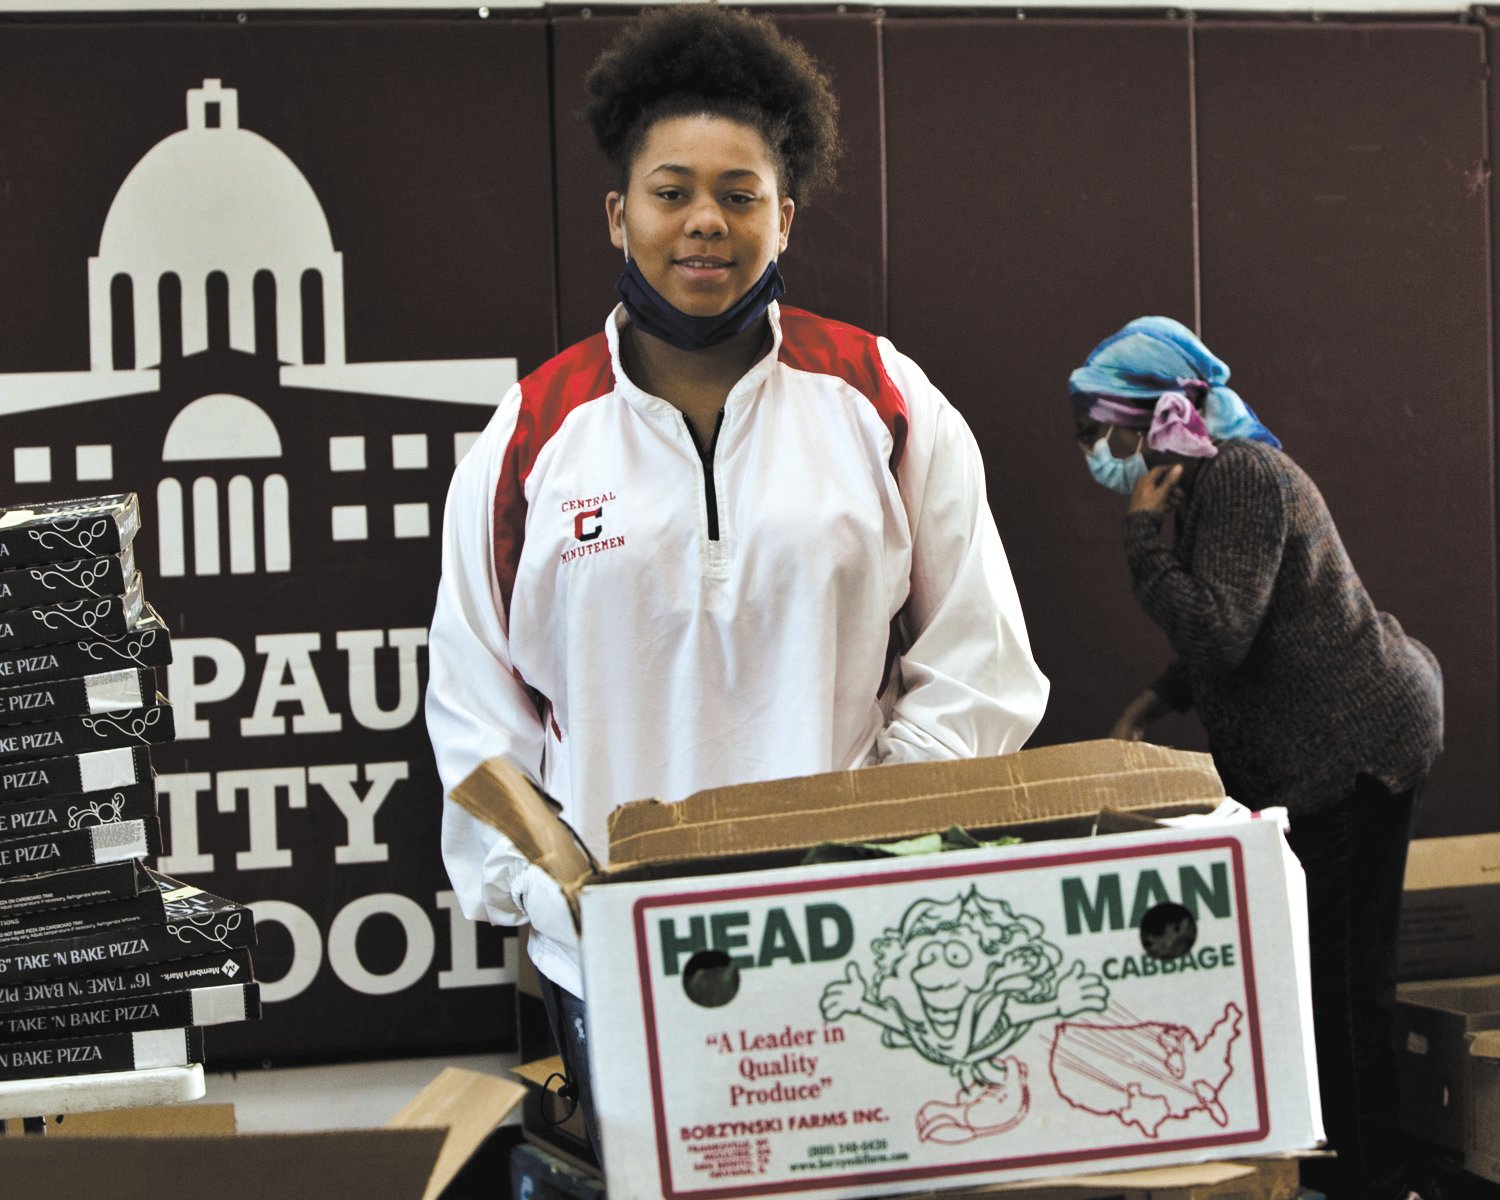 Jareen Eason-Fearson is one of many Frogtown residents who helps sort and pack food items for distribution on Friday afternoons at St. Paul City School. (Photo by Margie O’Loughlin)